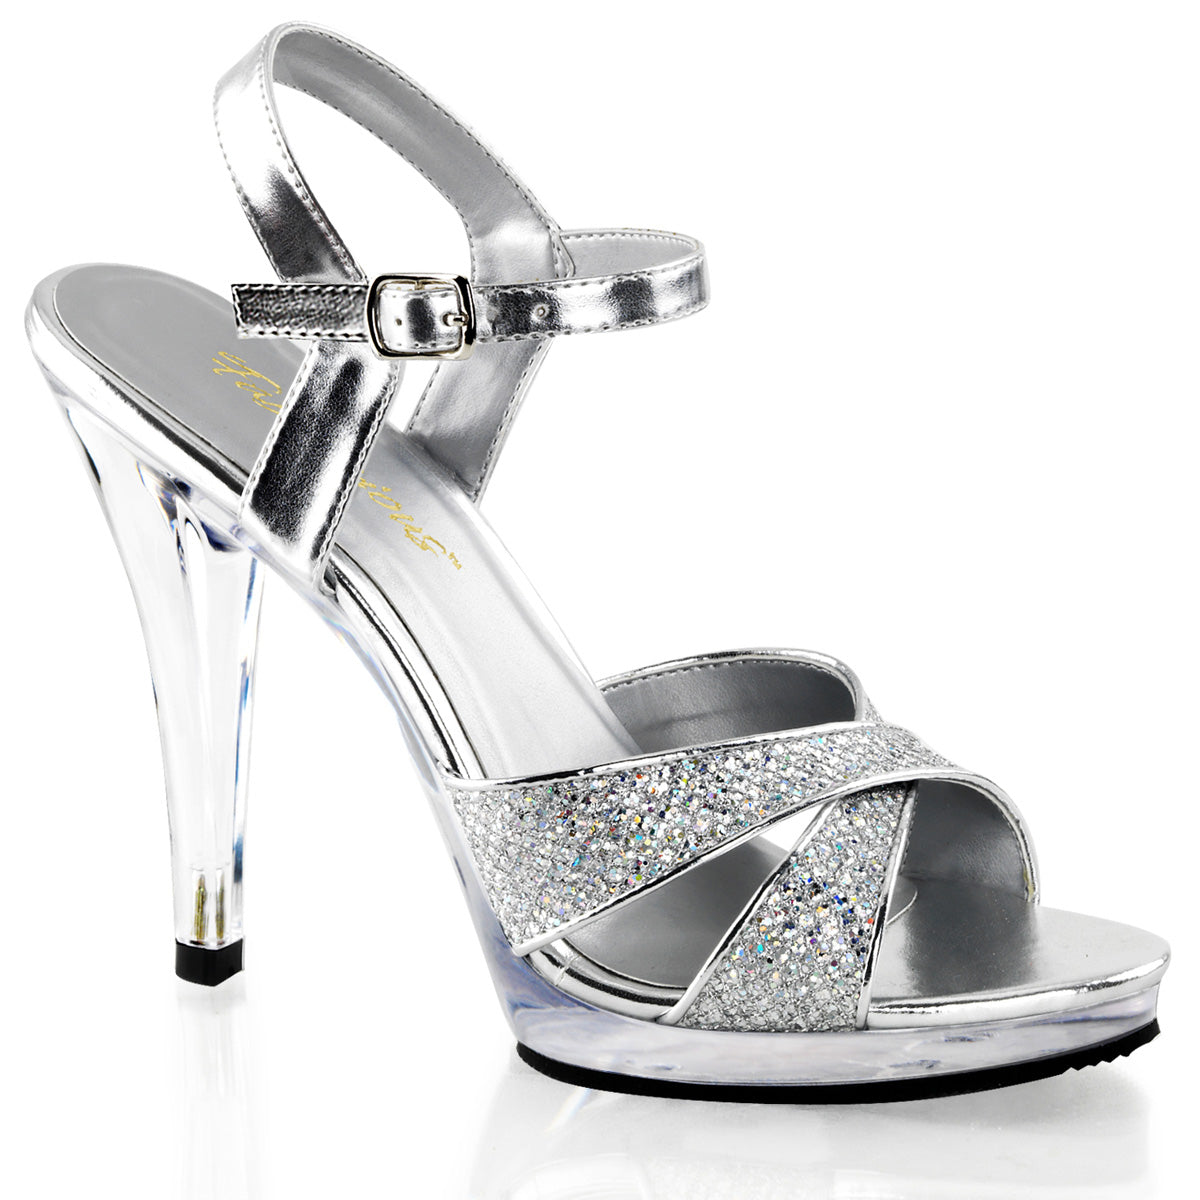 FLAIR-419(G) Exotic Dancing Fabulicious Shoes Slv Multi Glitter/Clr